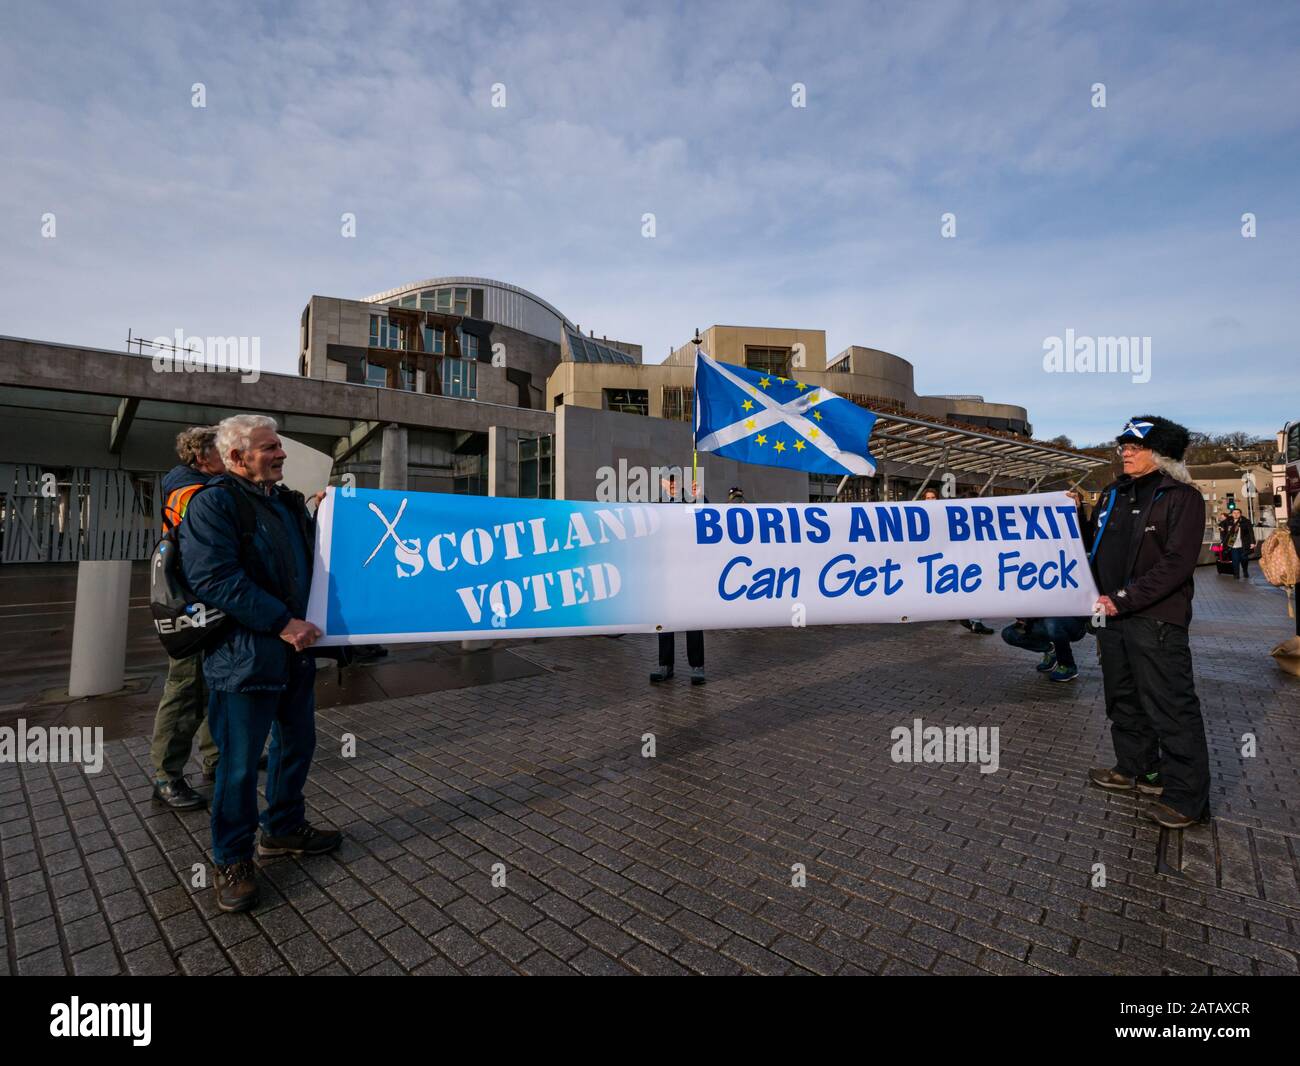 Anti-Brexit protestors at Scottish parliament on Brexit Day with banner against Boris and Brexit, Holyrood, Edinburgh, Scotland, UK Stock Photo